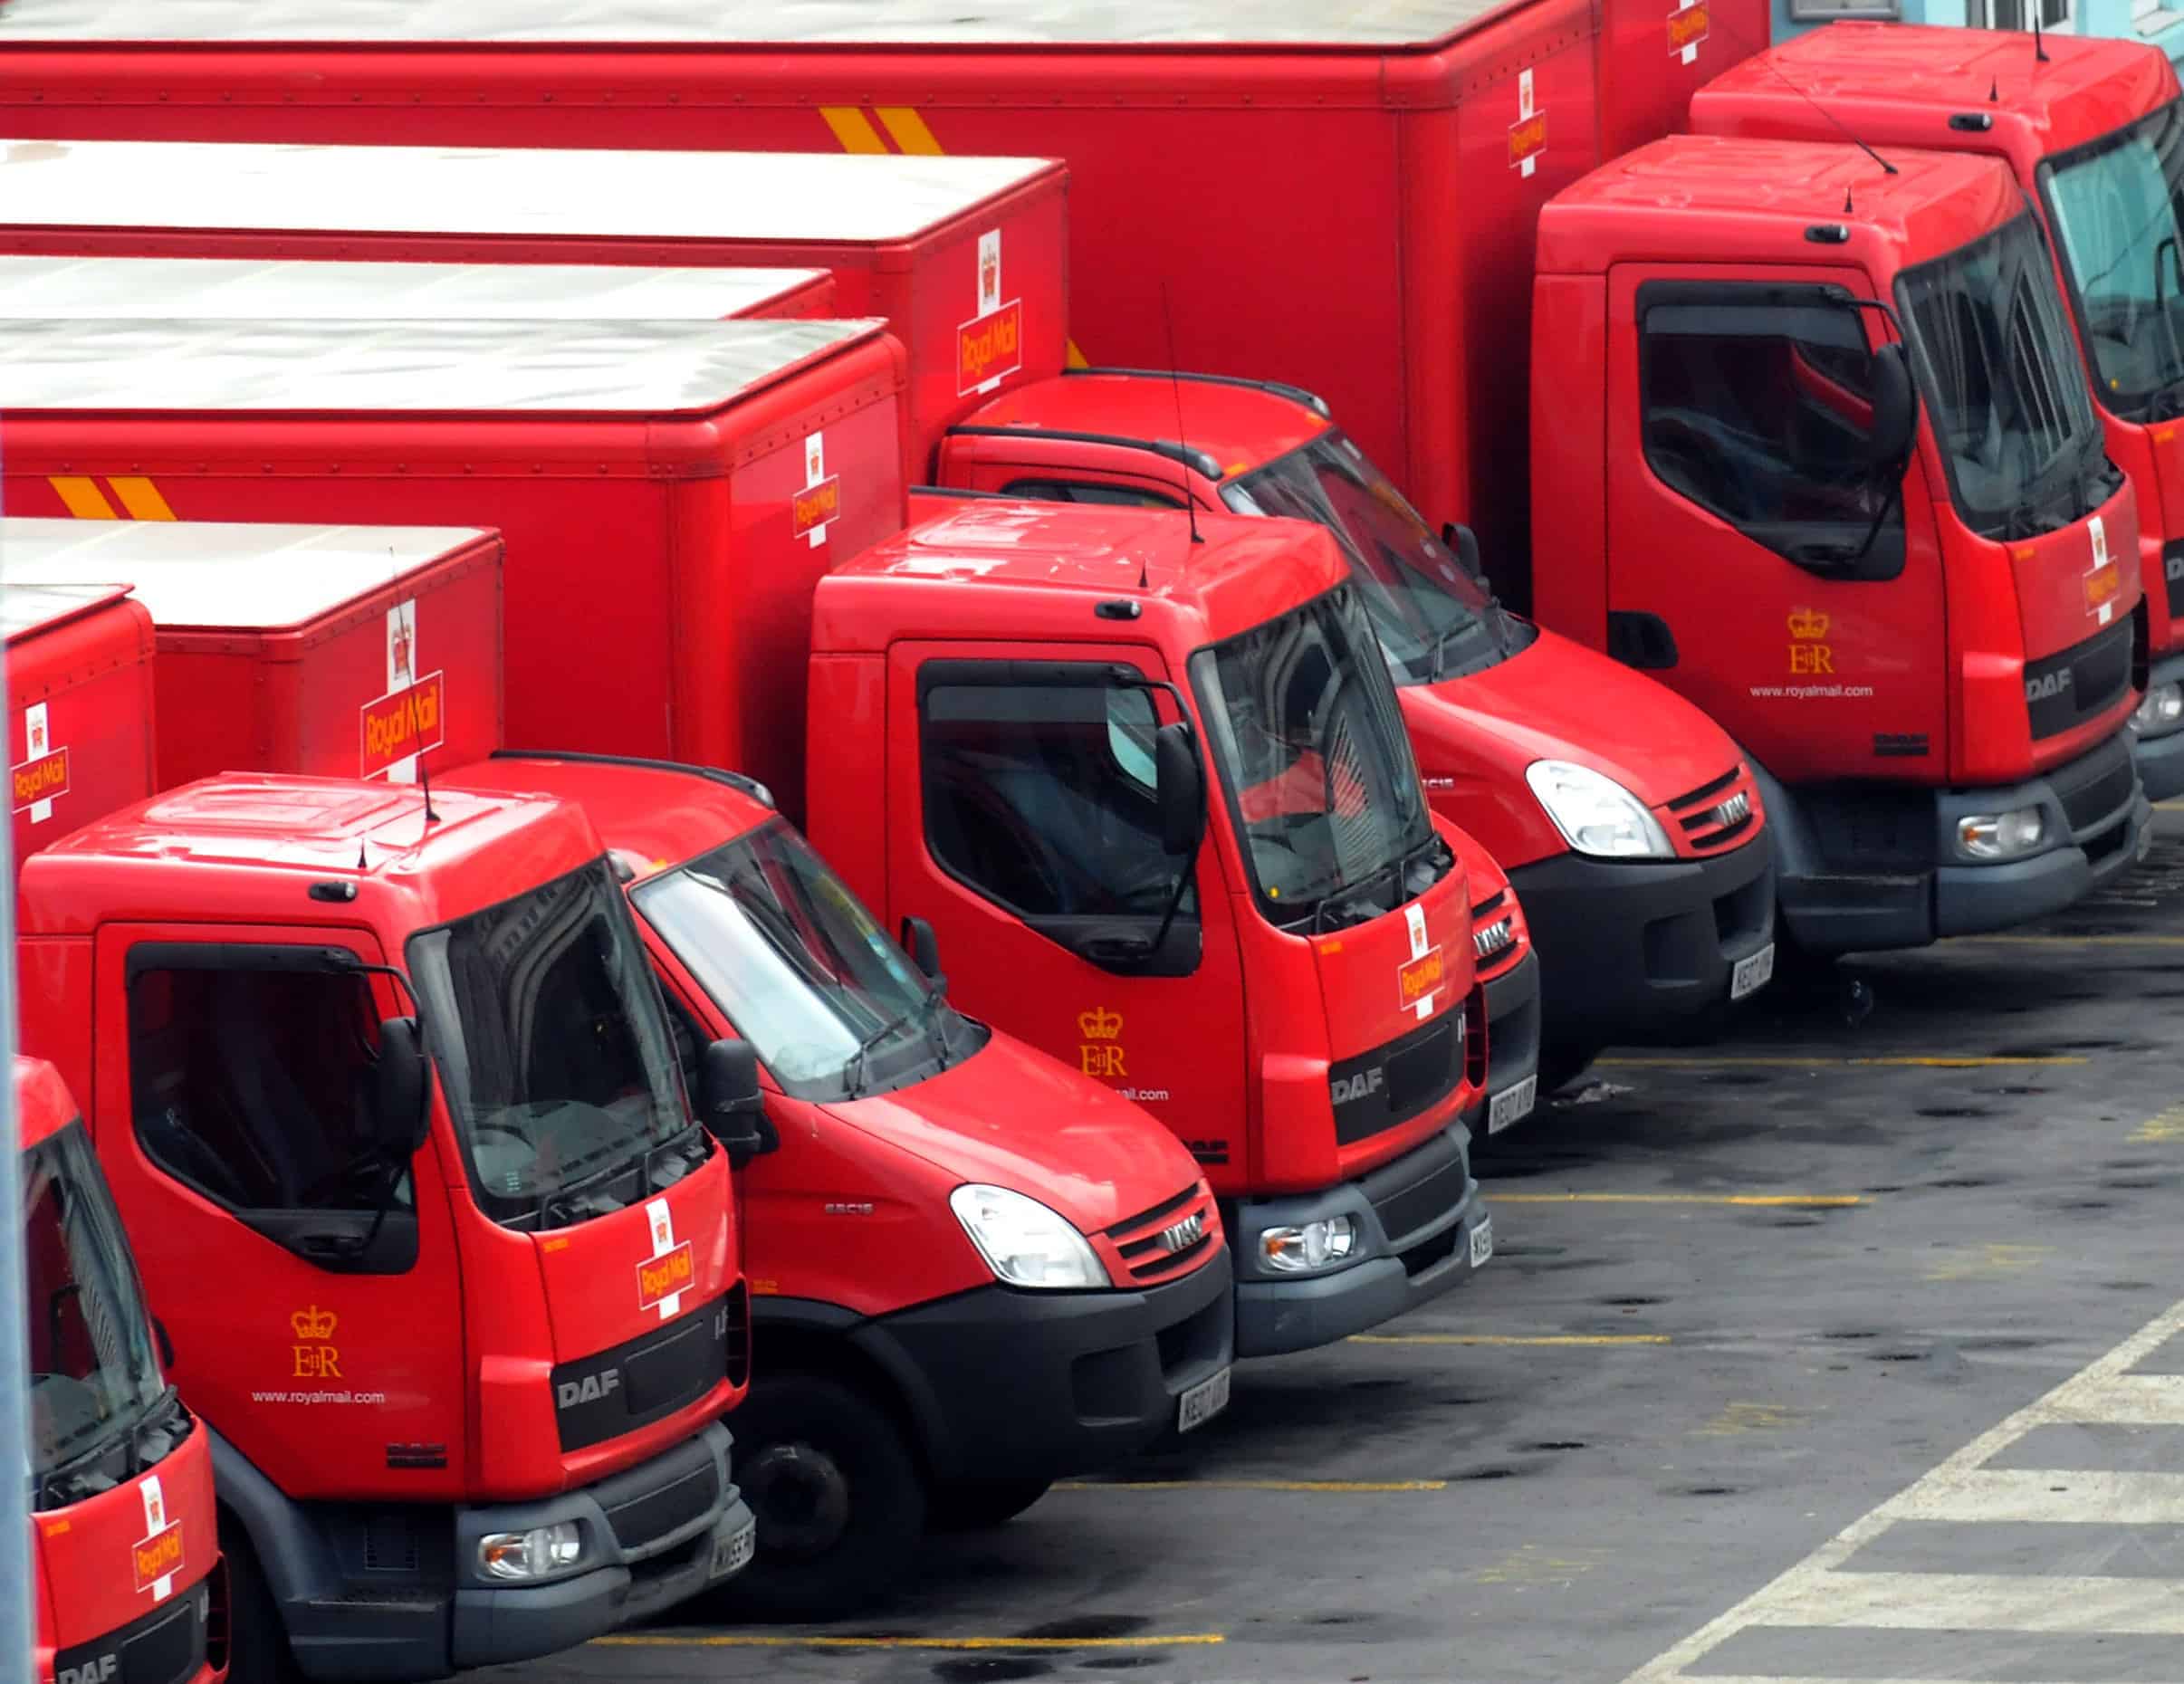 Postal workers’ union loses appeal against injunction blocking potential strikes